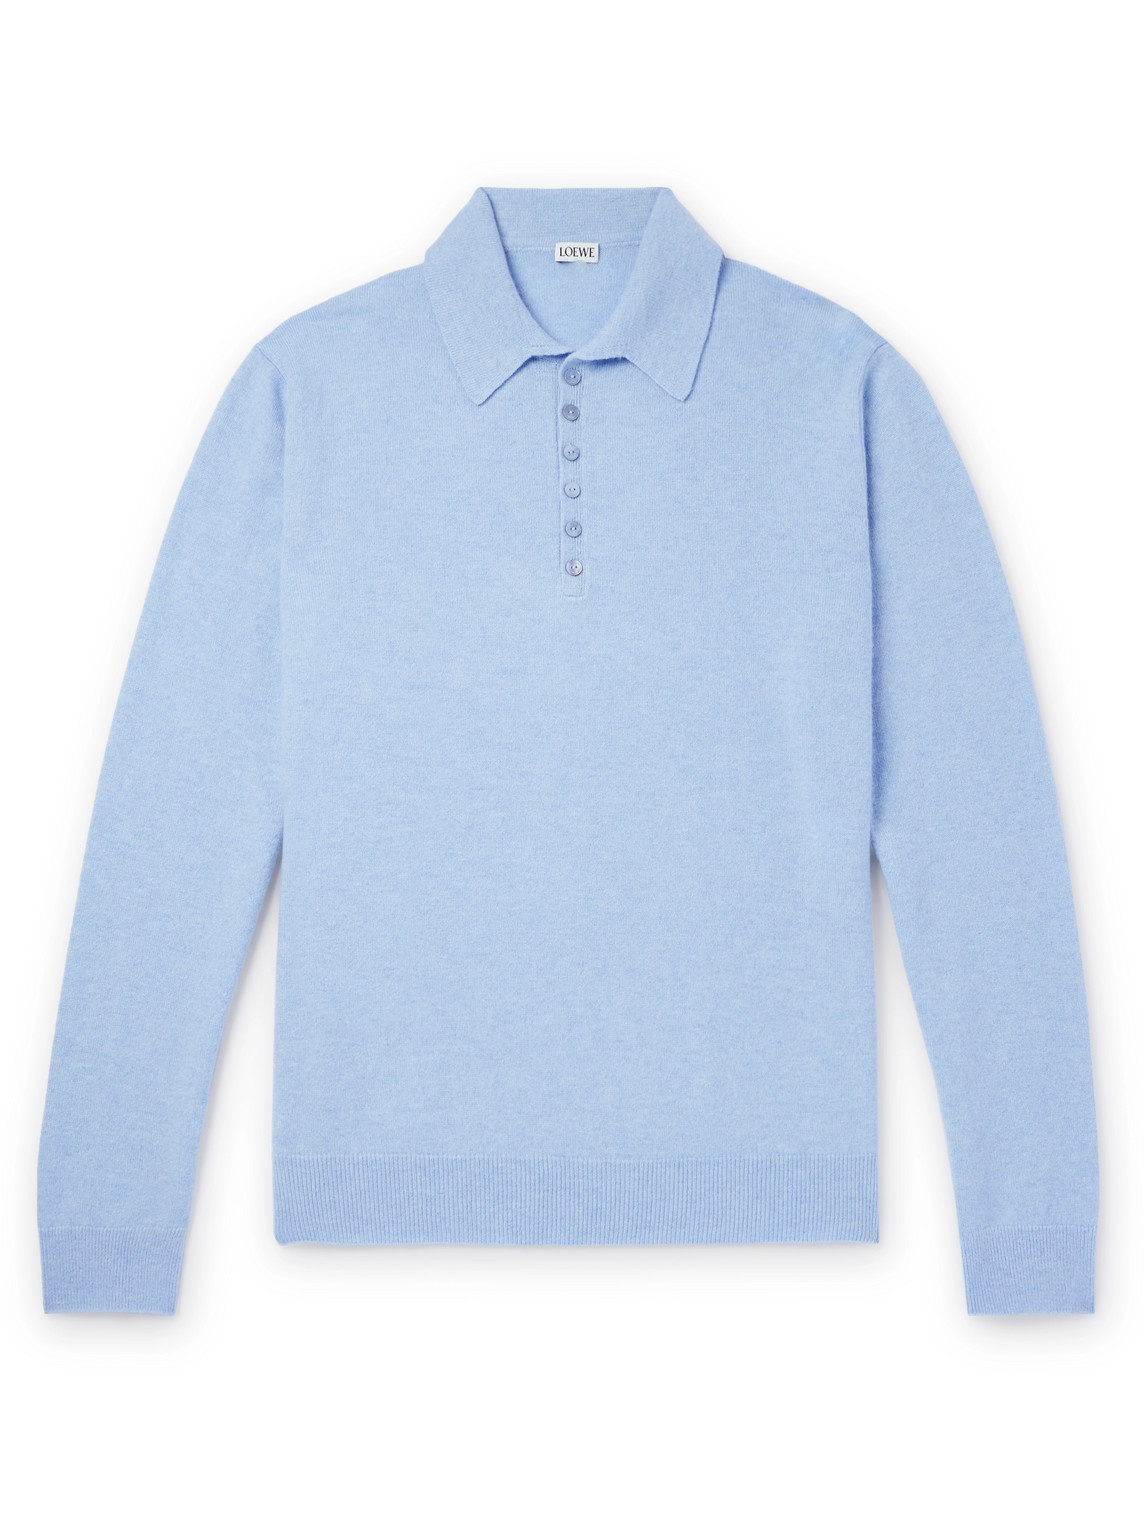 Loewe Cashmere Polo Shirt In Blue